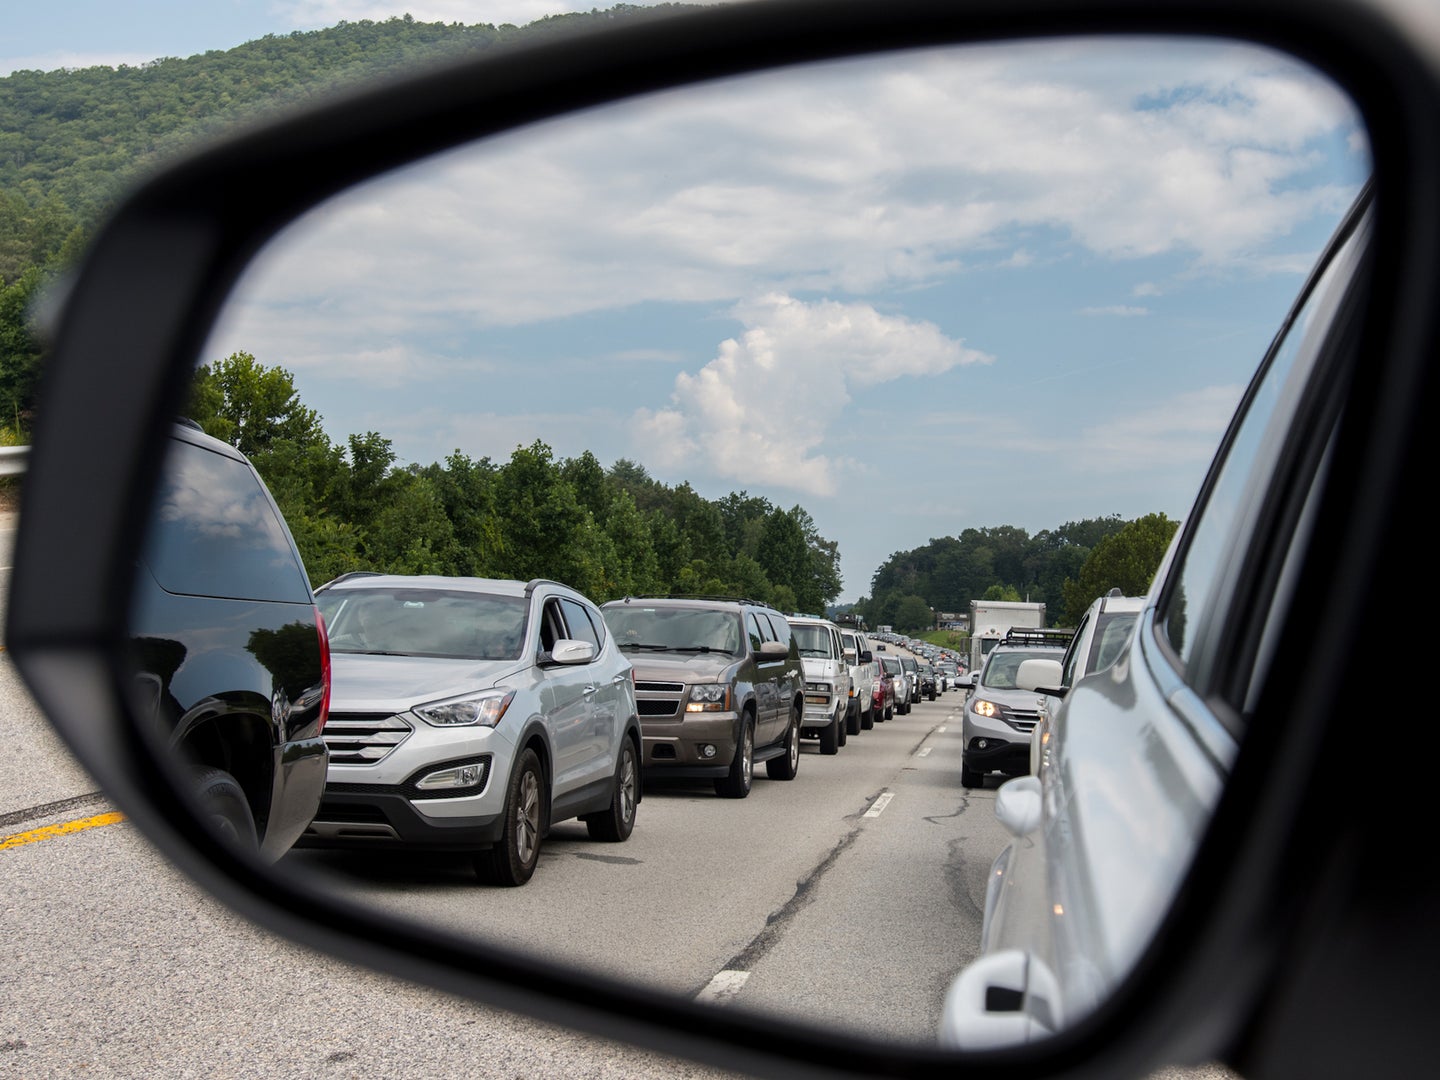 Traffic jam seen in car's sideview mirror